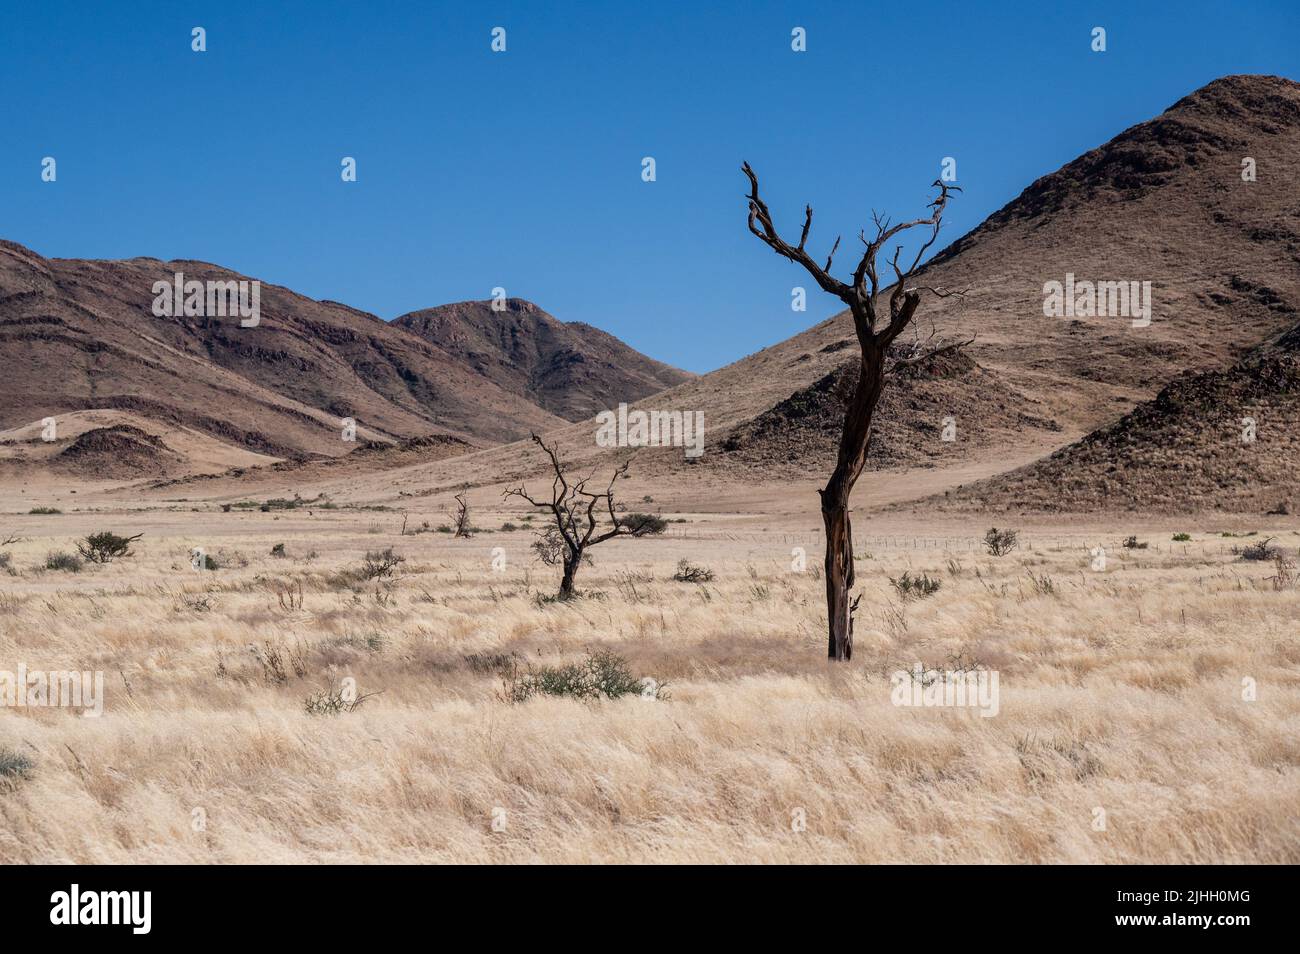 Dead trees and mountains in Namibia Africa Stock Photo